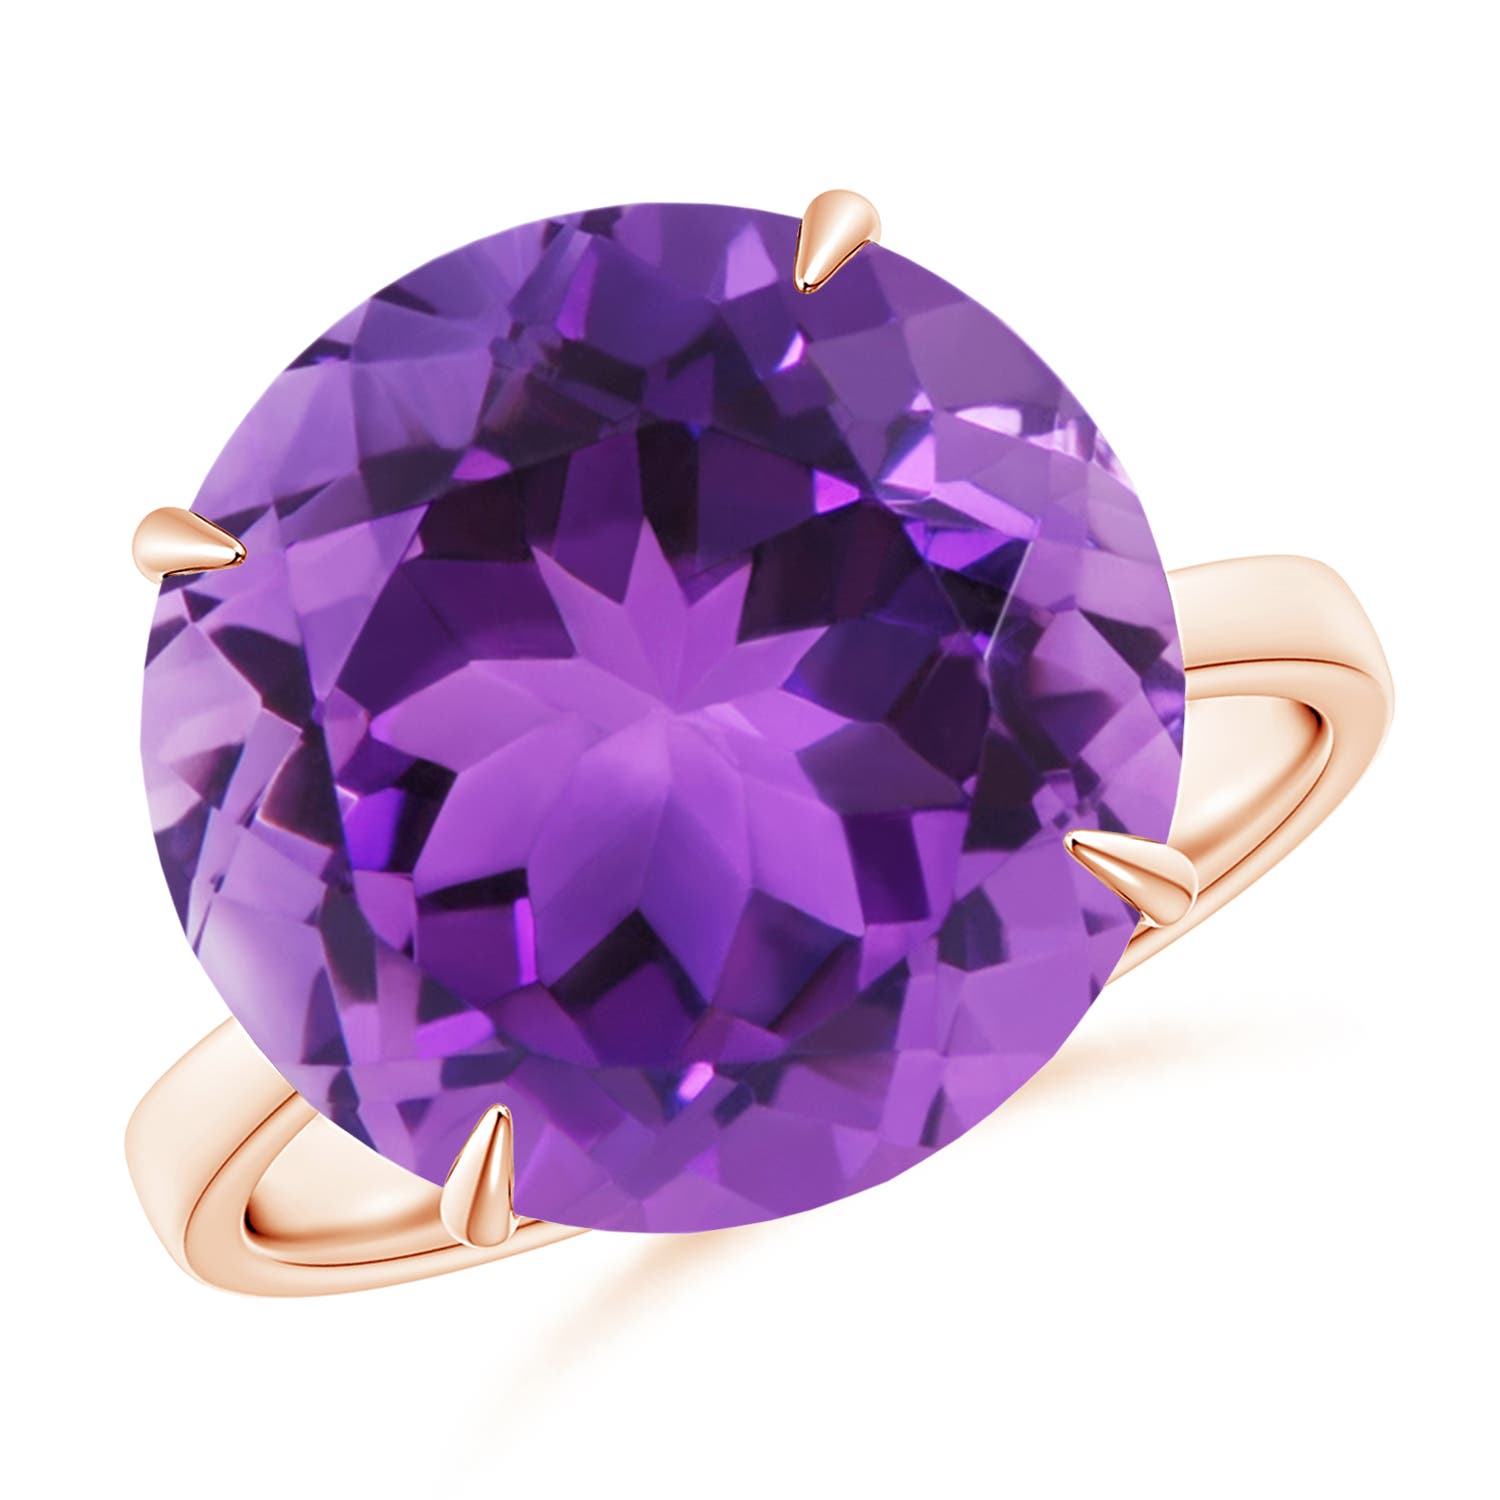 AAA - Amethyst / 8.5 CT / 14 KT Rose Gold